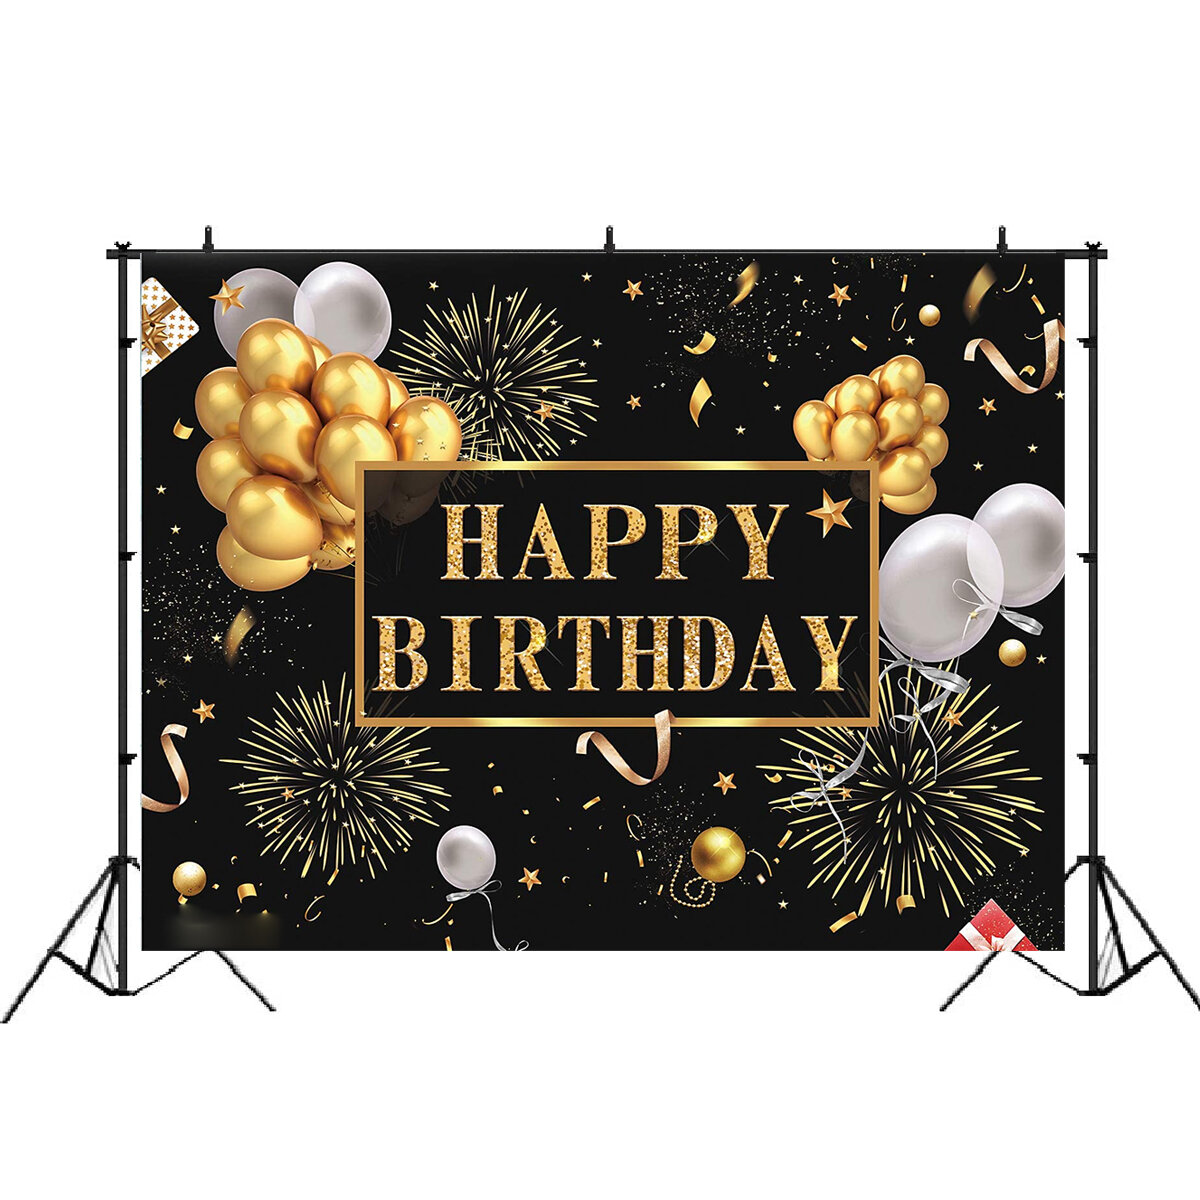 3D Birthday Photography Background Cloth Black Wall Photo Studio Home Office Party Decoration Multi 